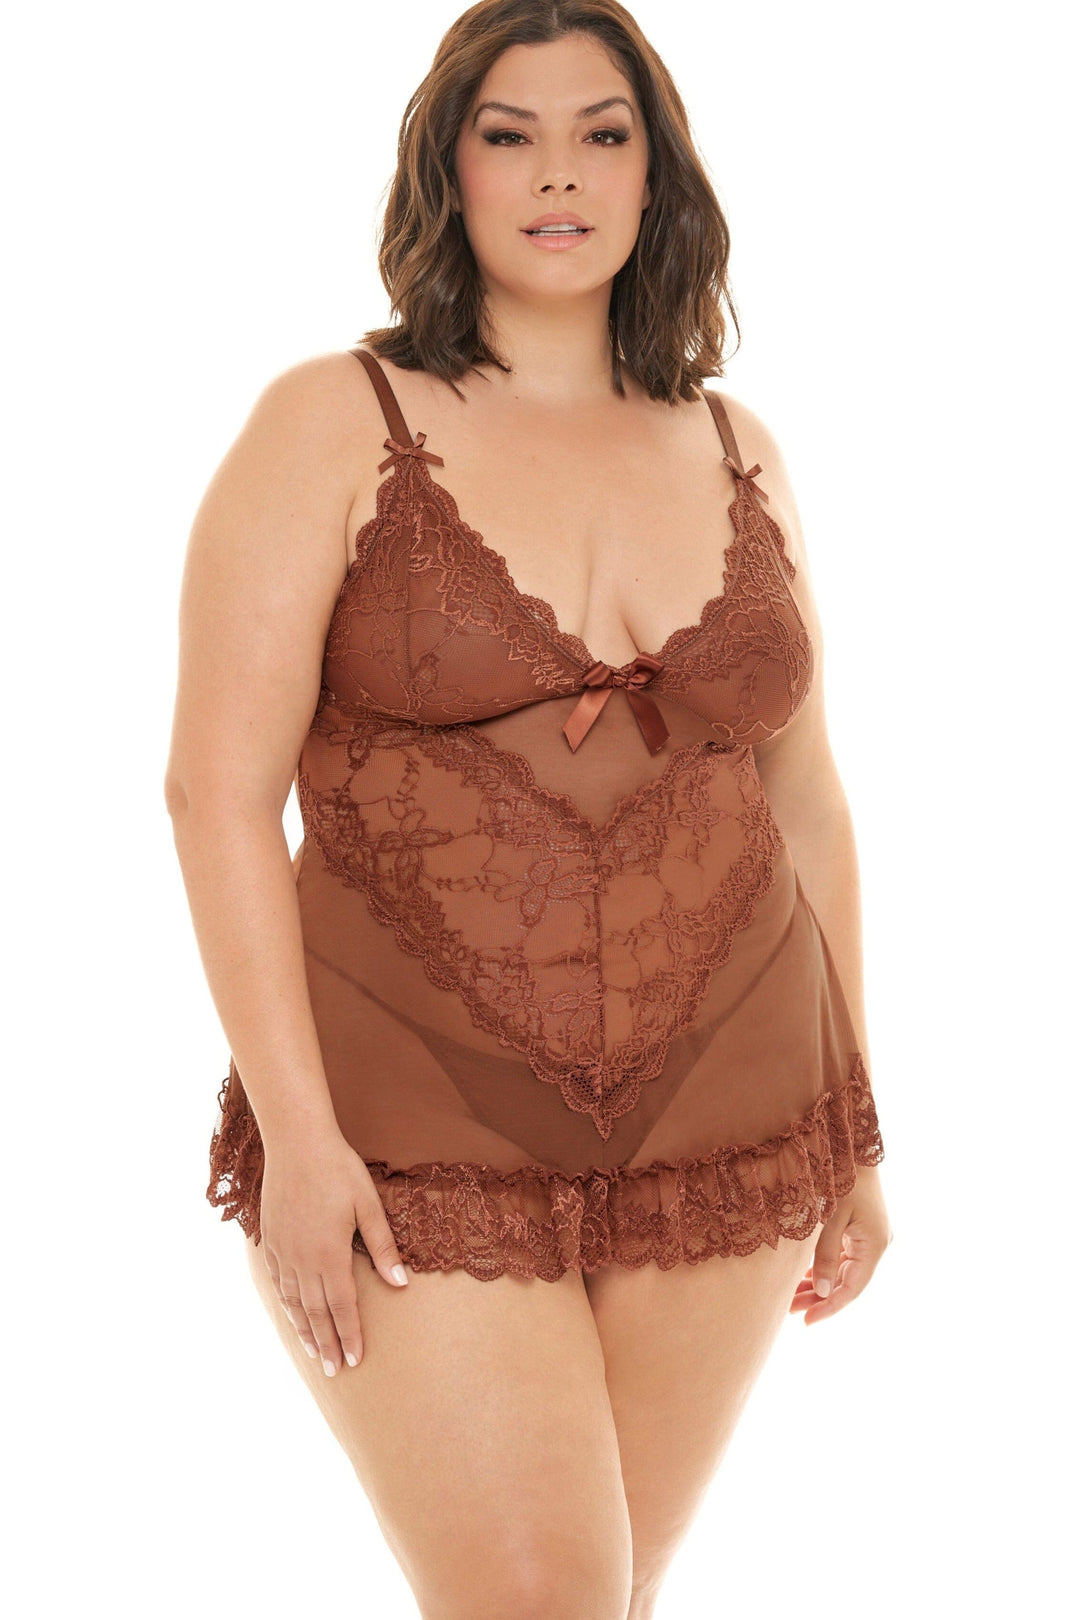 Soft Cup Lacey Babydoll With Bows And G-String-Babydolls-Oh La La Cheri-Brown-3X/4X-SEXYSHOES.COM